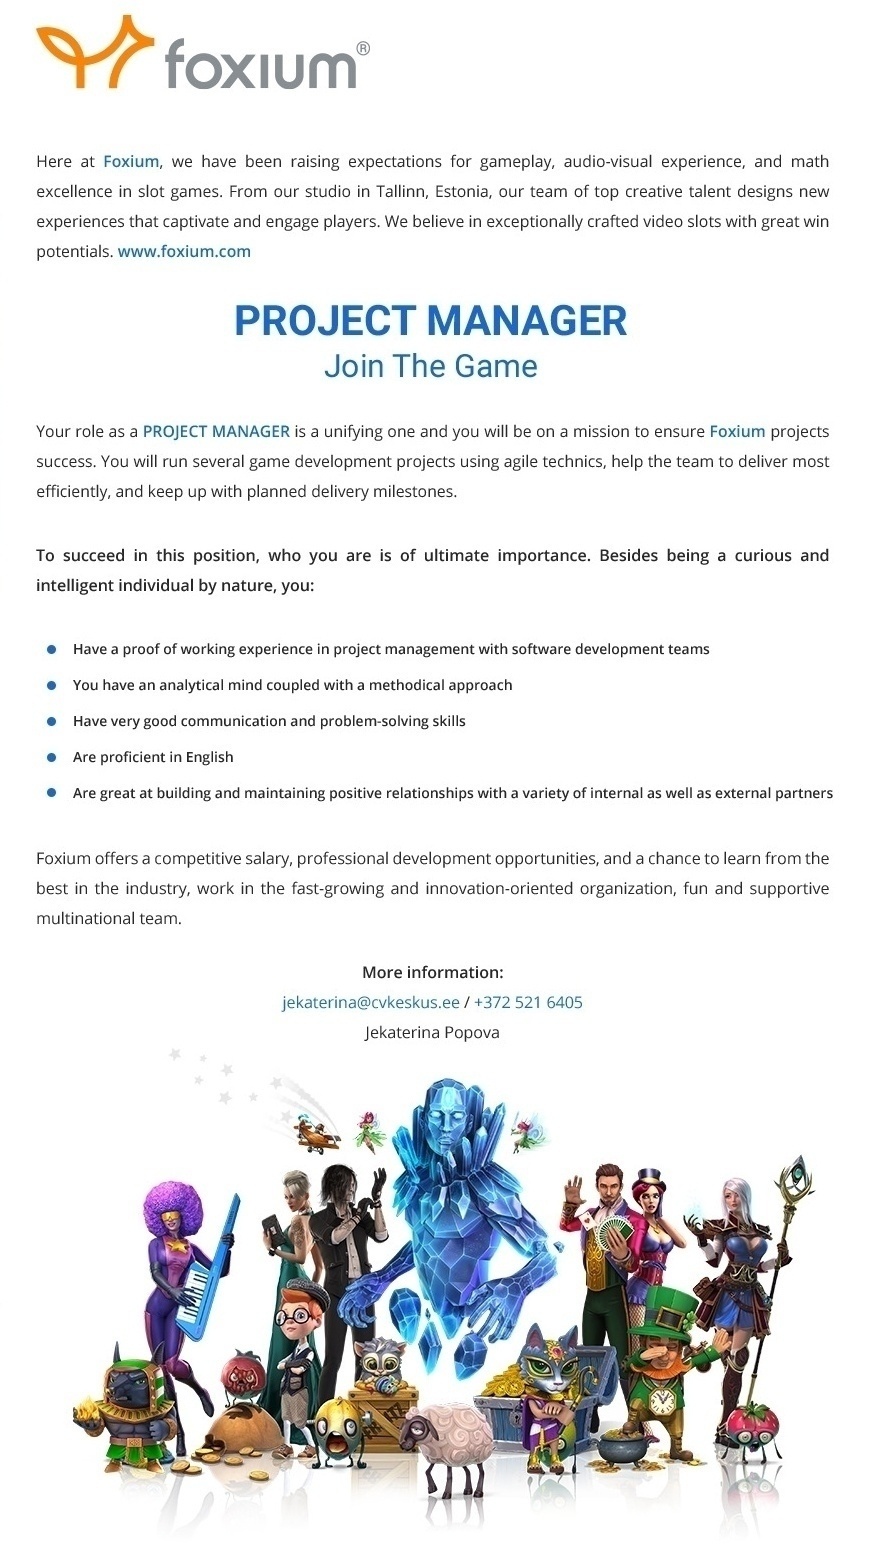 Foxium OÜ PROJECT MANAGER - JOIN THE GAME